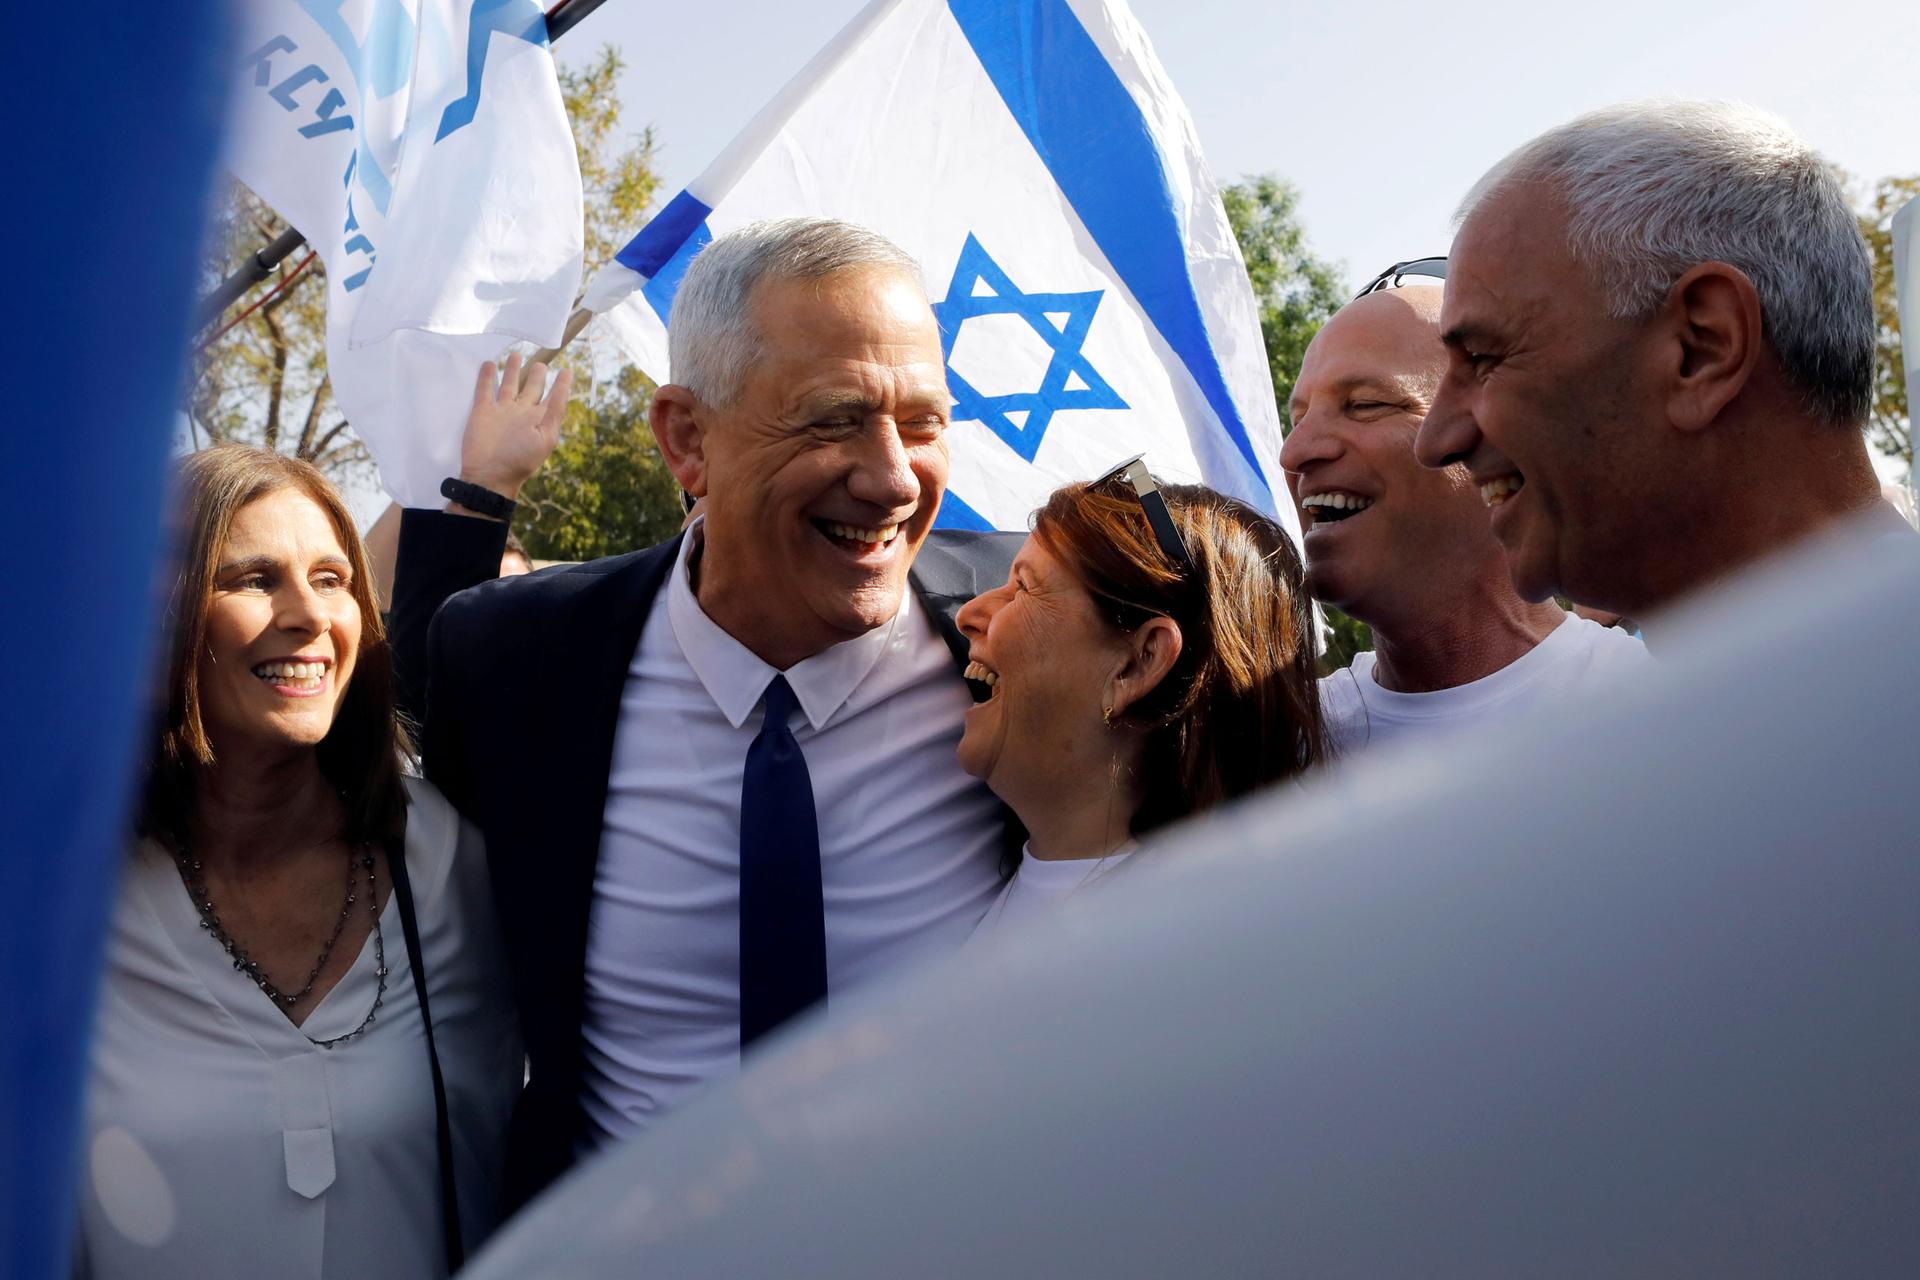 Benny Gantz is shown hugging his wife under his arm and an Israeli flag held behind him in the background.